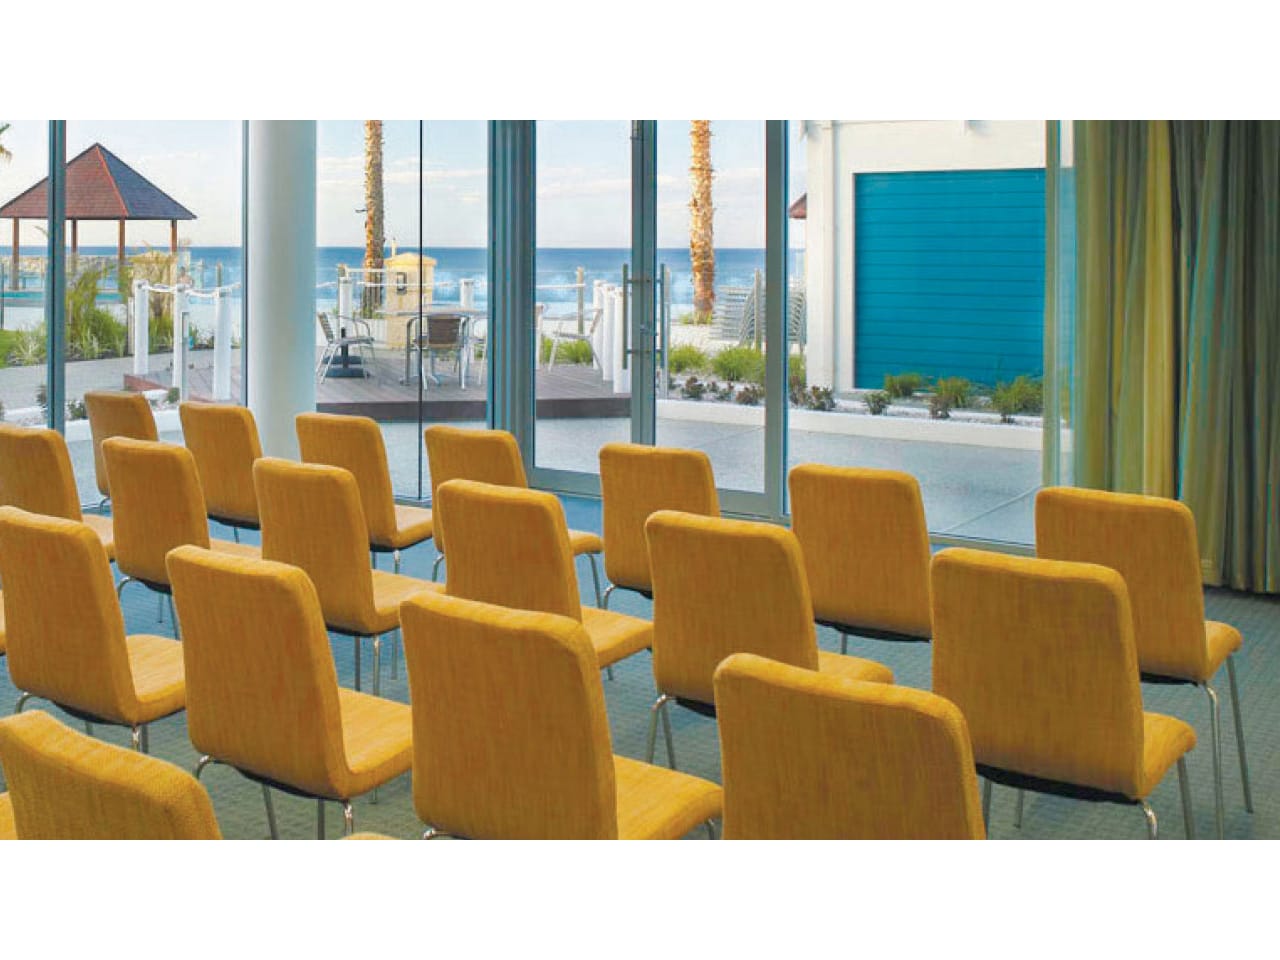 Rows of yellow seats ready for a conference with ocean views